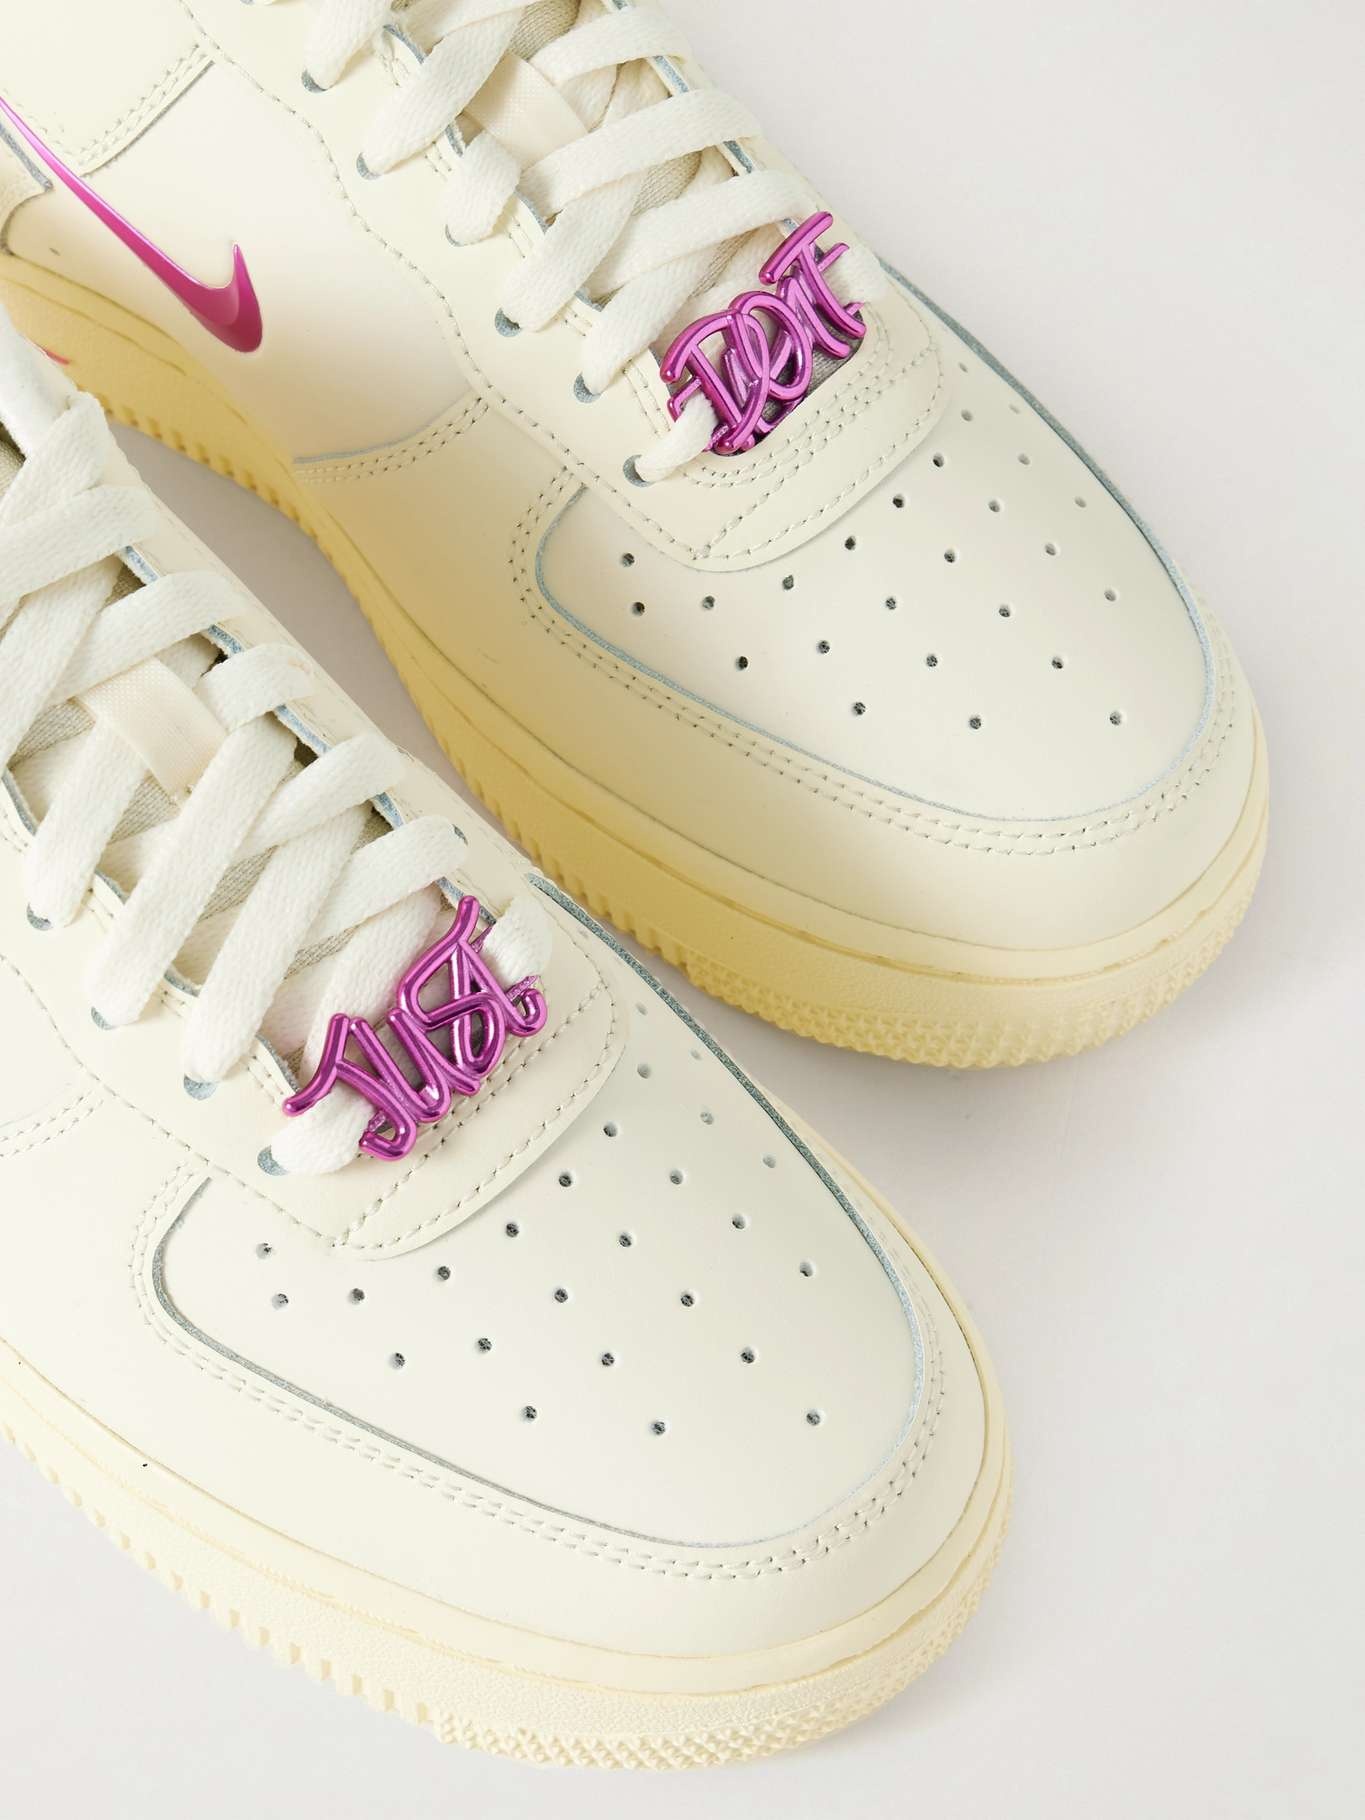 Air Force 1 '07 metallic leather sneakers - 4